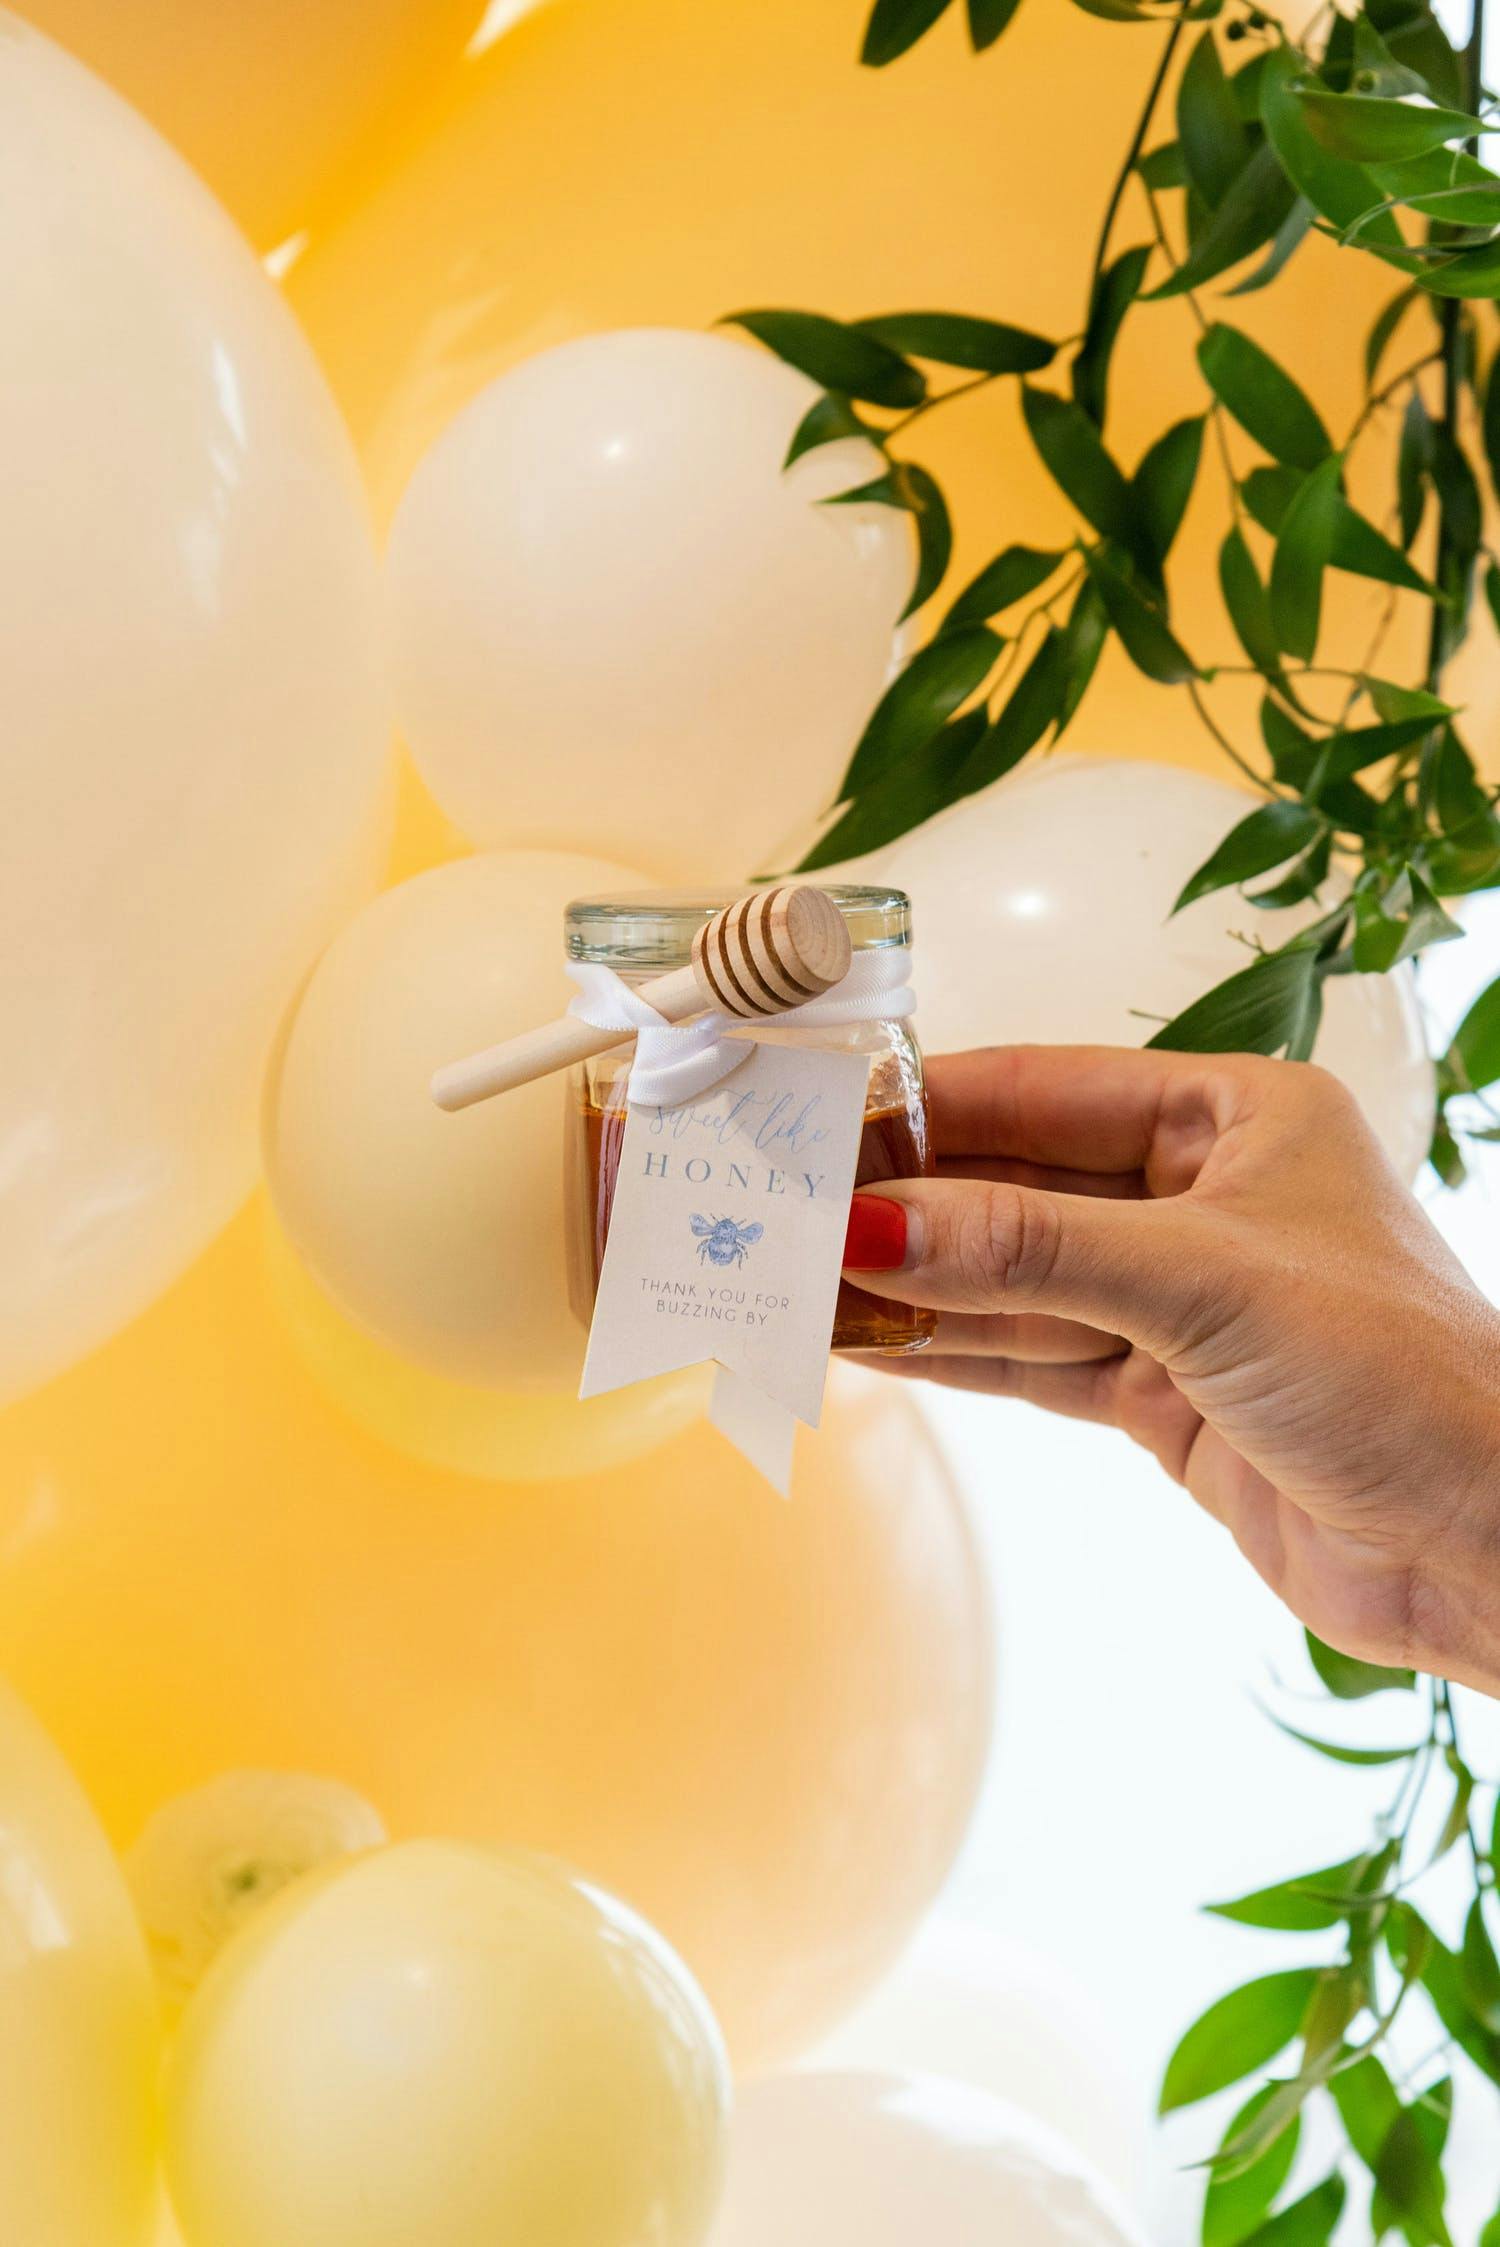 Honey Bee Themed Party With Mini Honey Jars and Yellow and White Balloons | PartySlate